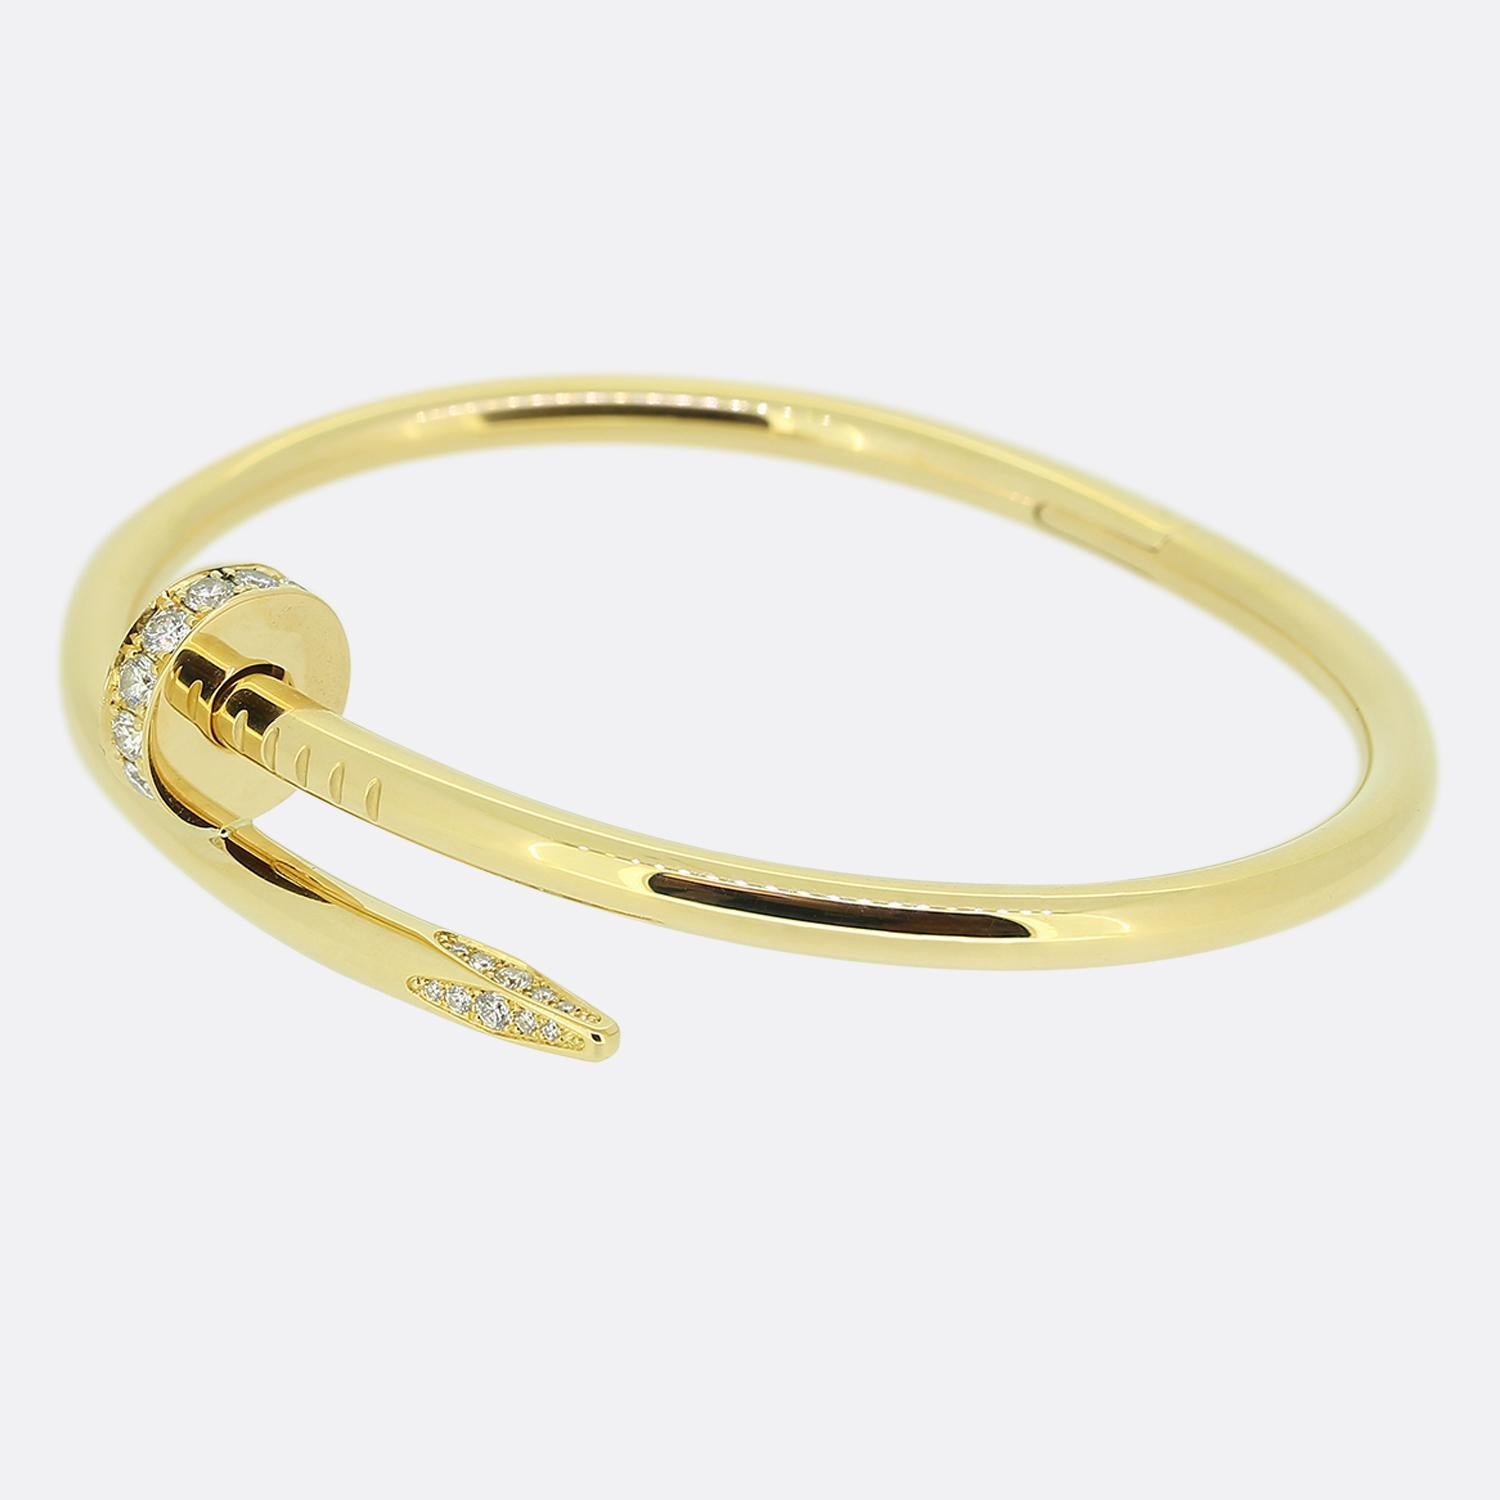 Here we have an 18ct yellow gold bracelet from the world renowned luxury jewellery house of Cartier. This piece forms part of their iconic Juste un Clou collection and showcases a wrap around nail design with a diamond set head and tip. This is the